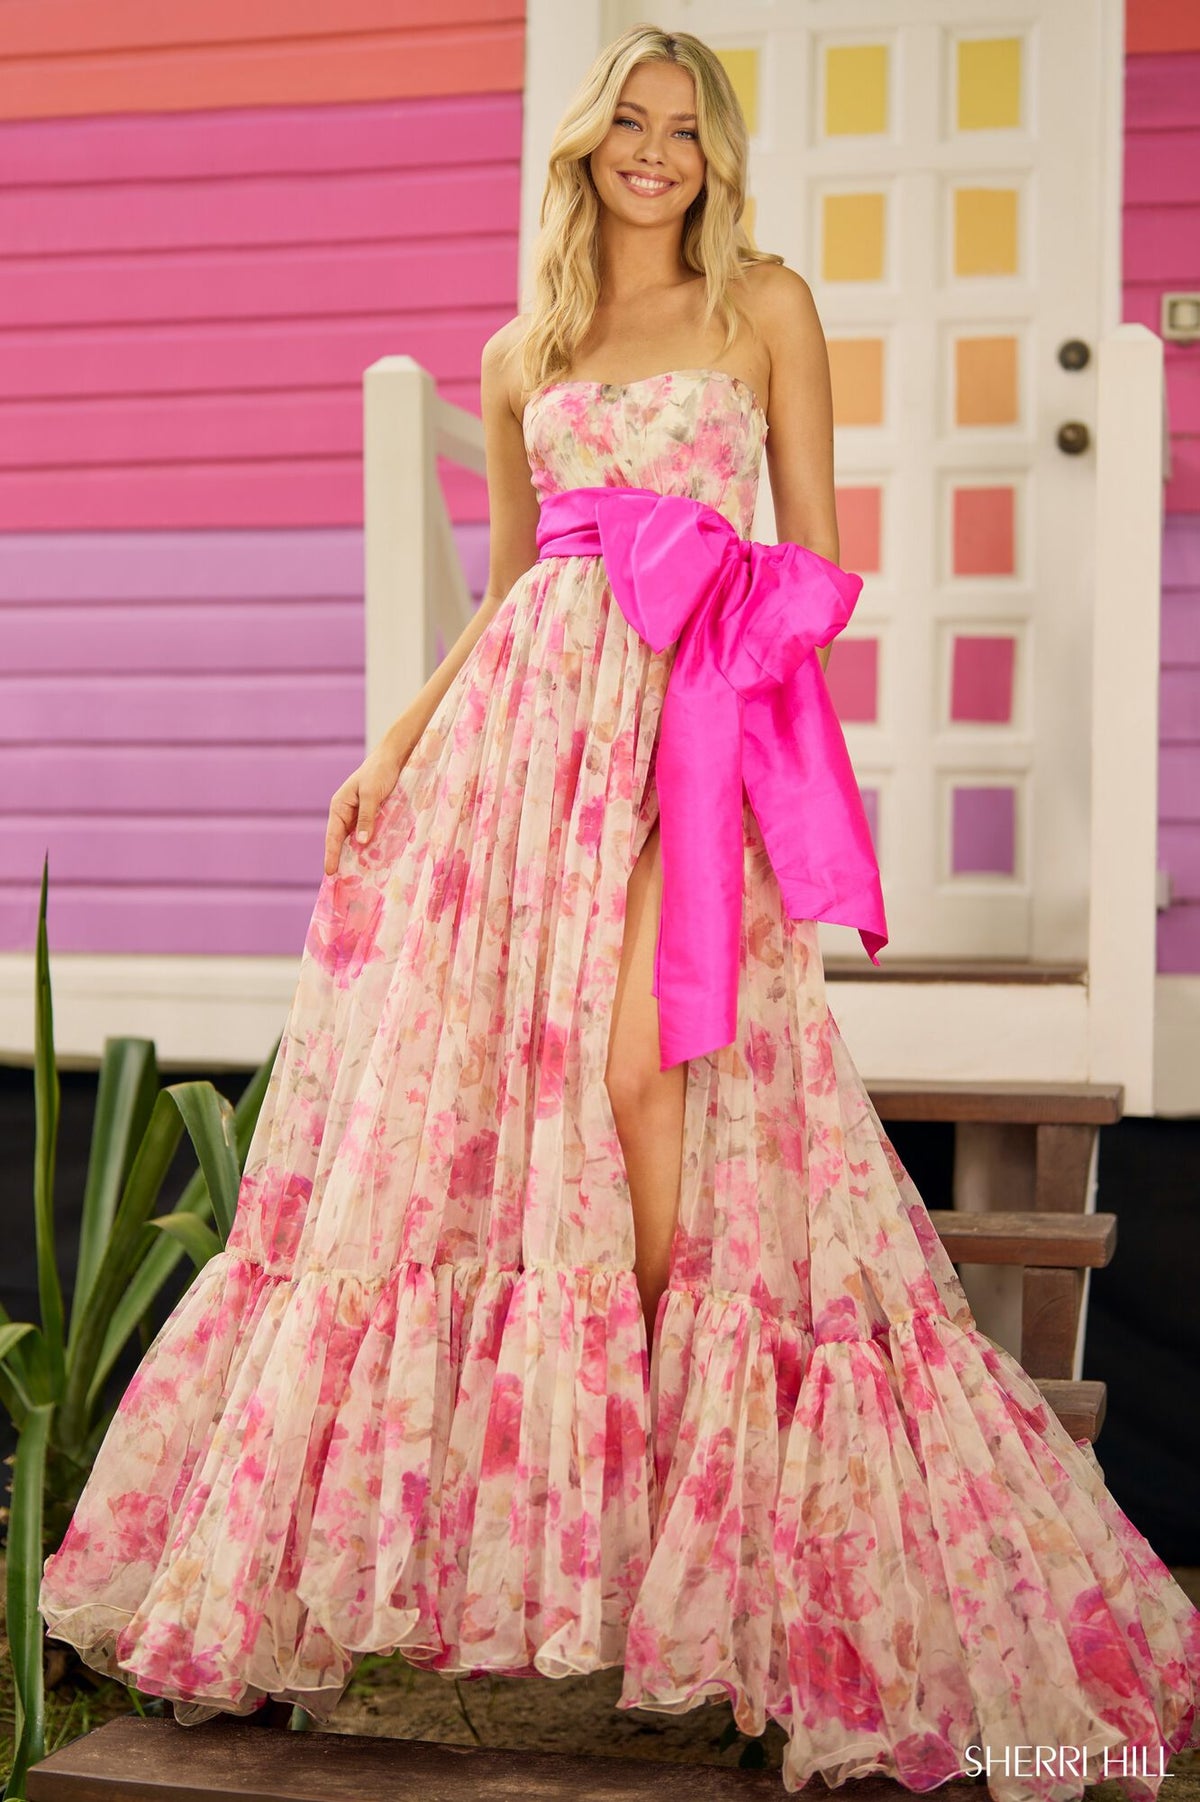 Sherri Hill 56110 - An elegant floral print ball gown with a strapless design, taffeta bow detail, and subtle skirt slit, perfect for a romantic and enchanting prom night.